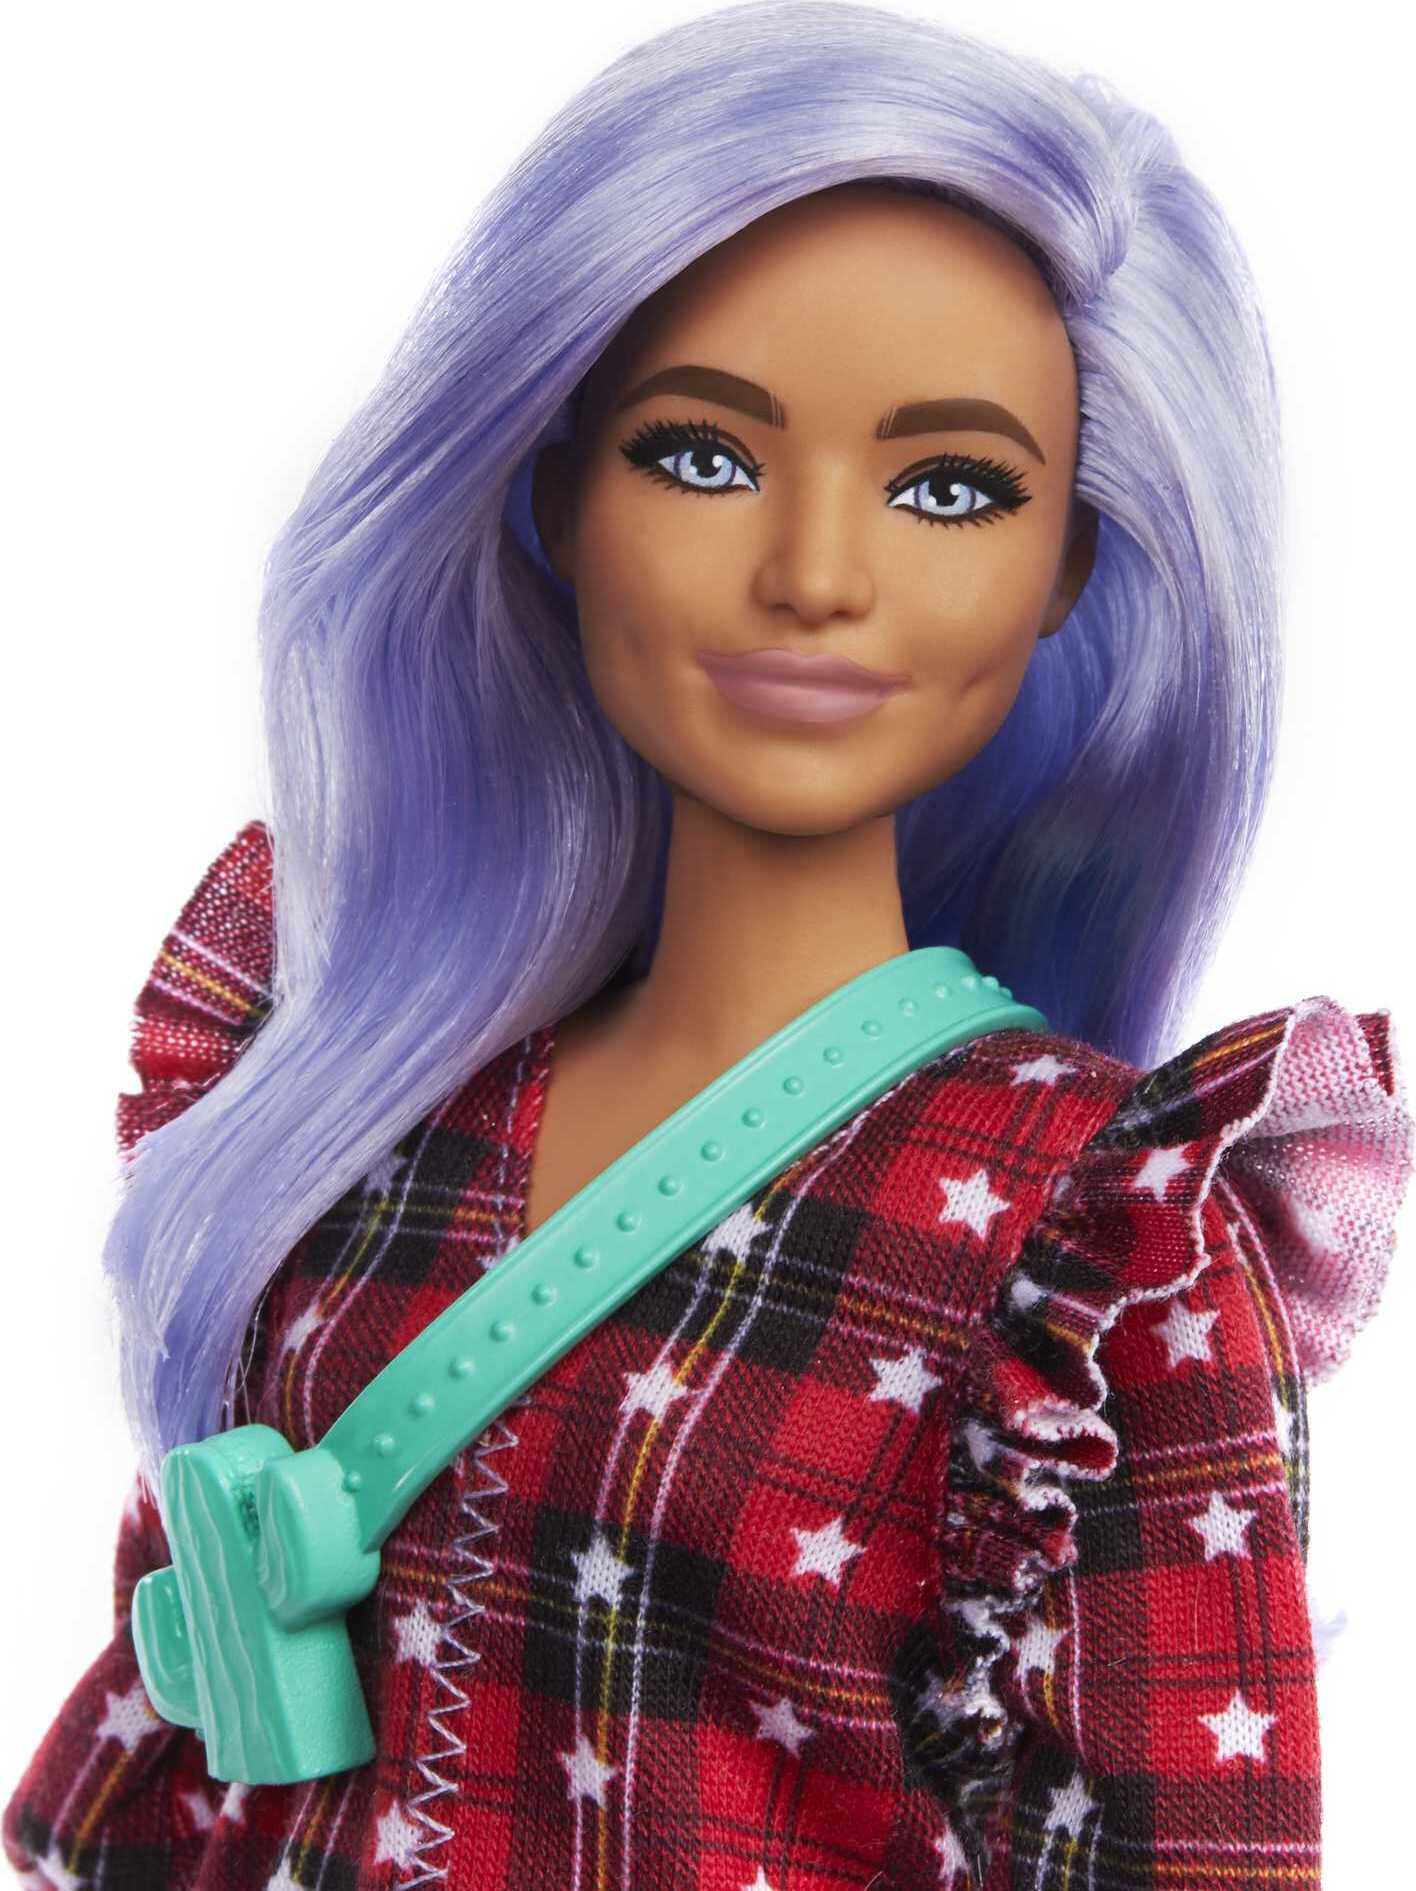 Barbie Fashionistas Doll #157, Curvy with Lavender Hair in Red Plaid Dress & White Cowboy Boots - image 5 of 7